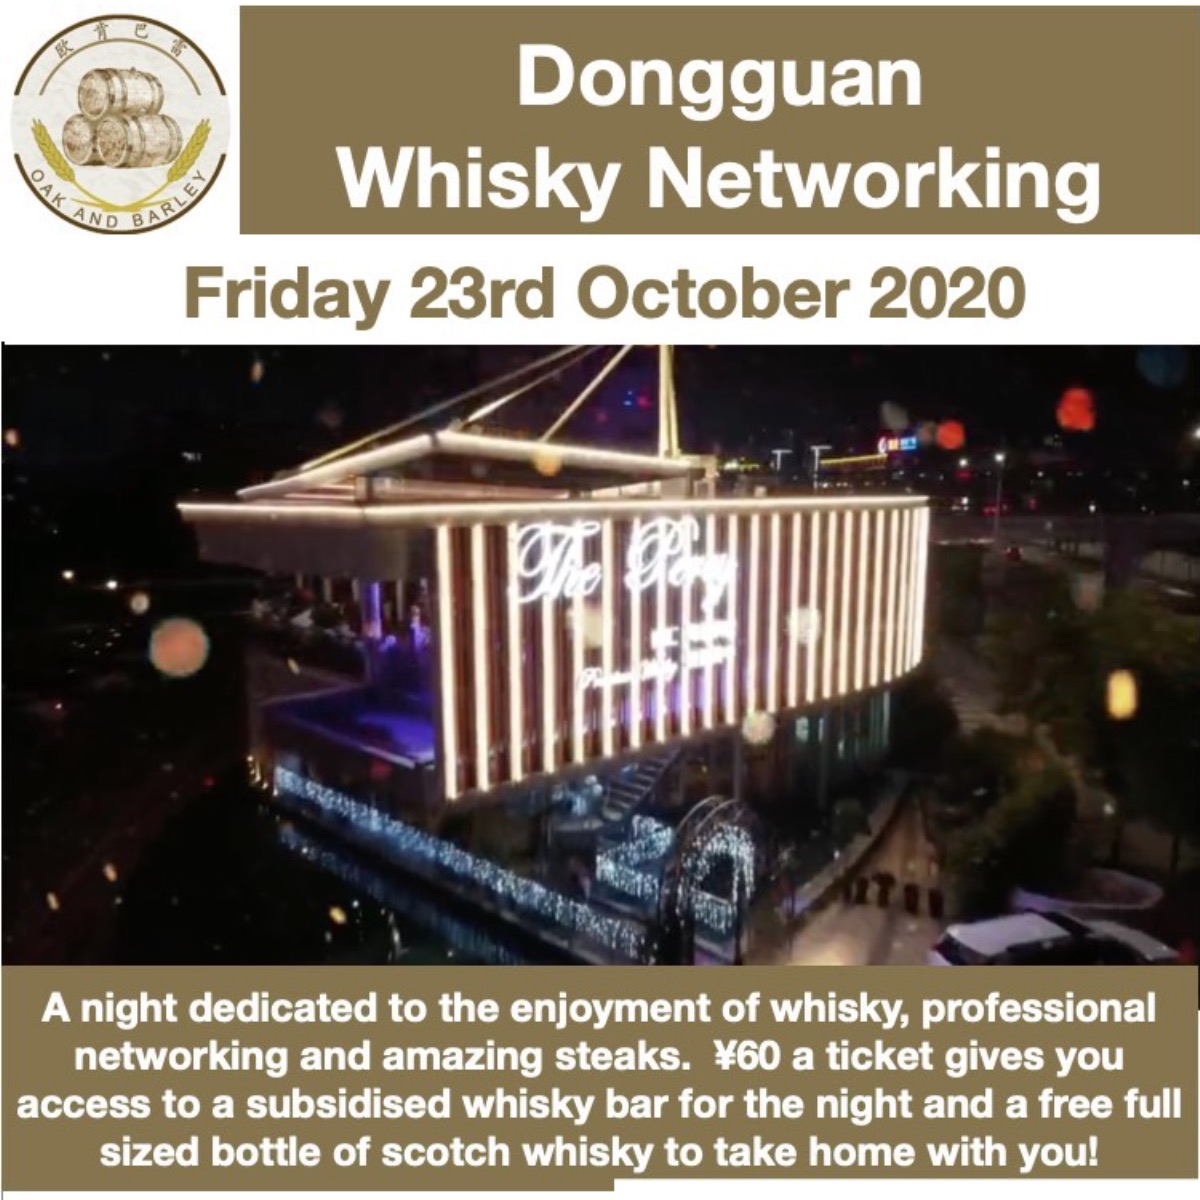 Dongguan Whisky Networking October 2020